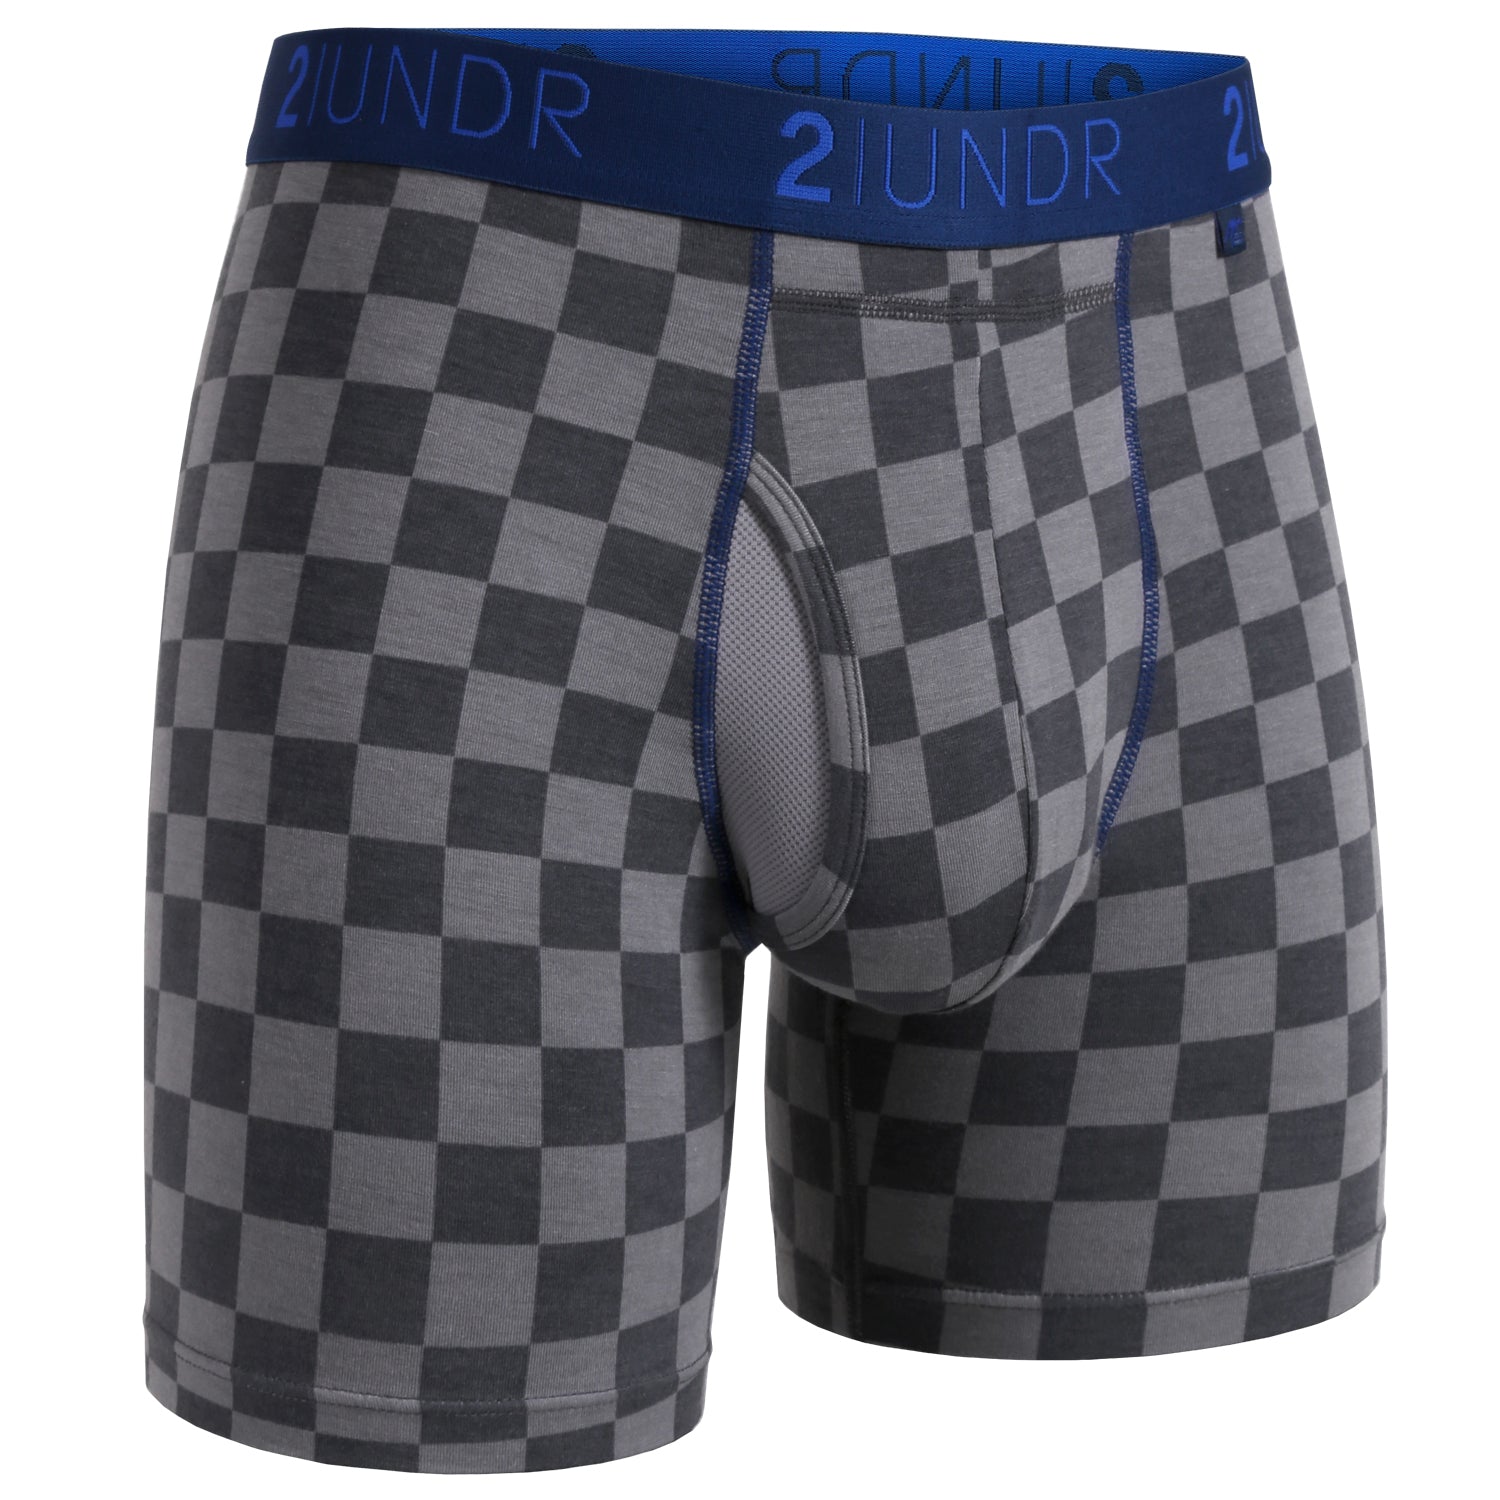 2Undr Swing Shift Boxer Brief Prints - Check Mate - My Filosophy